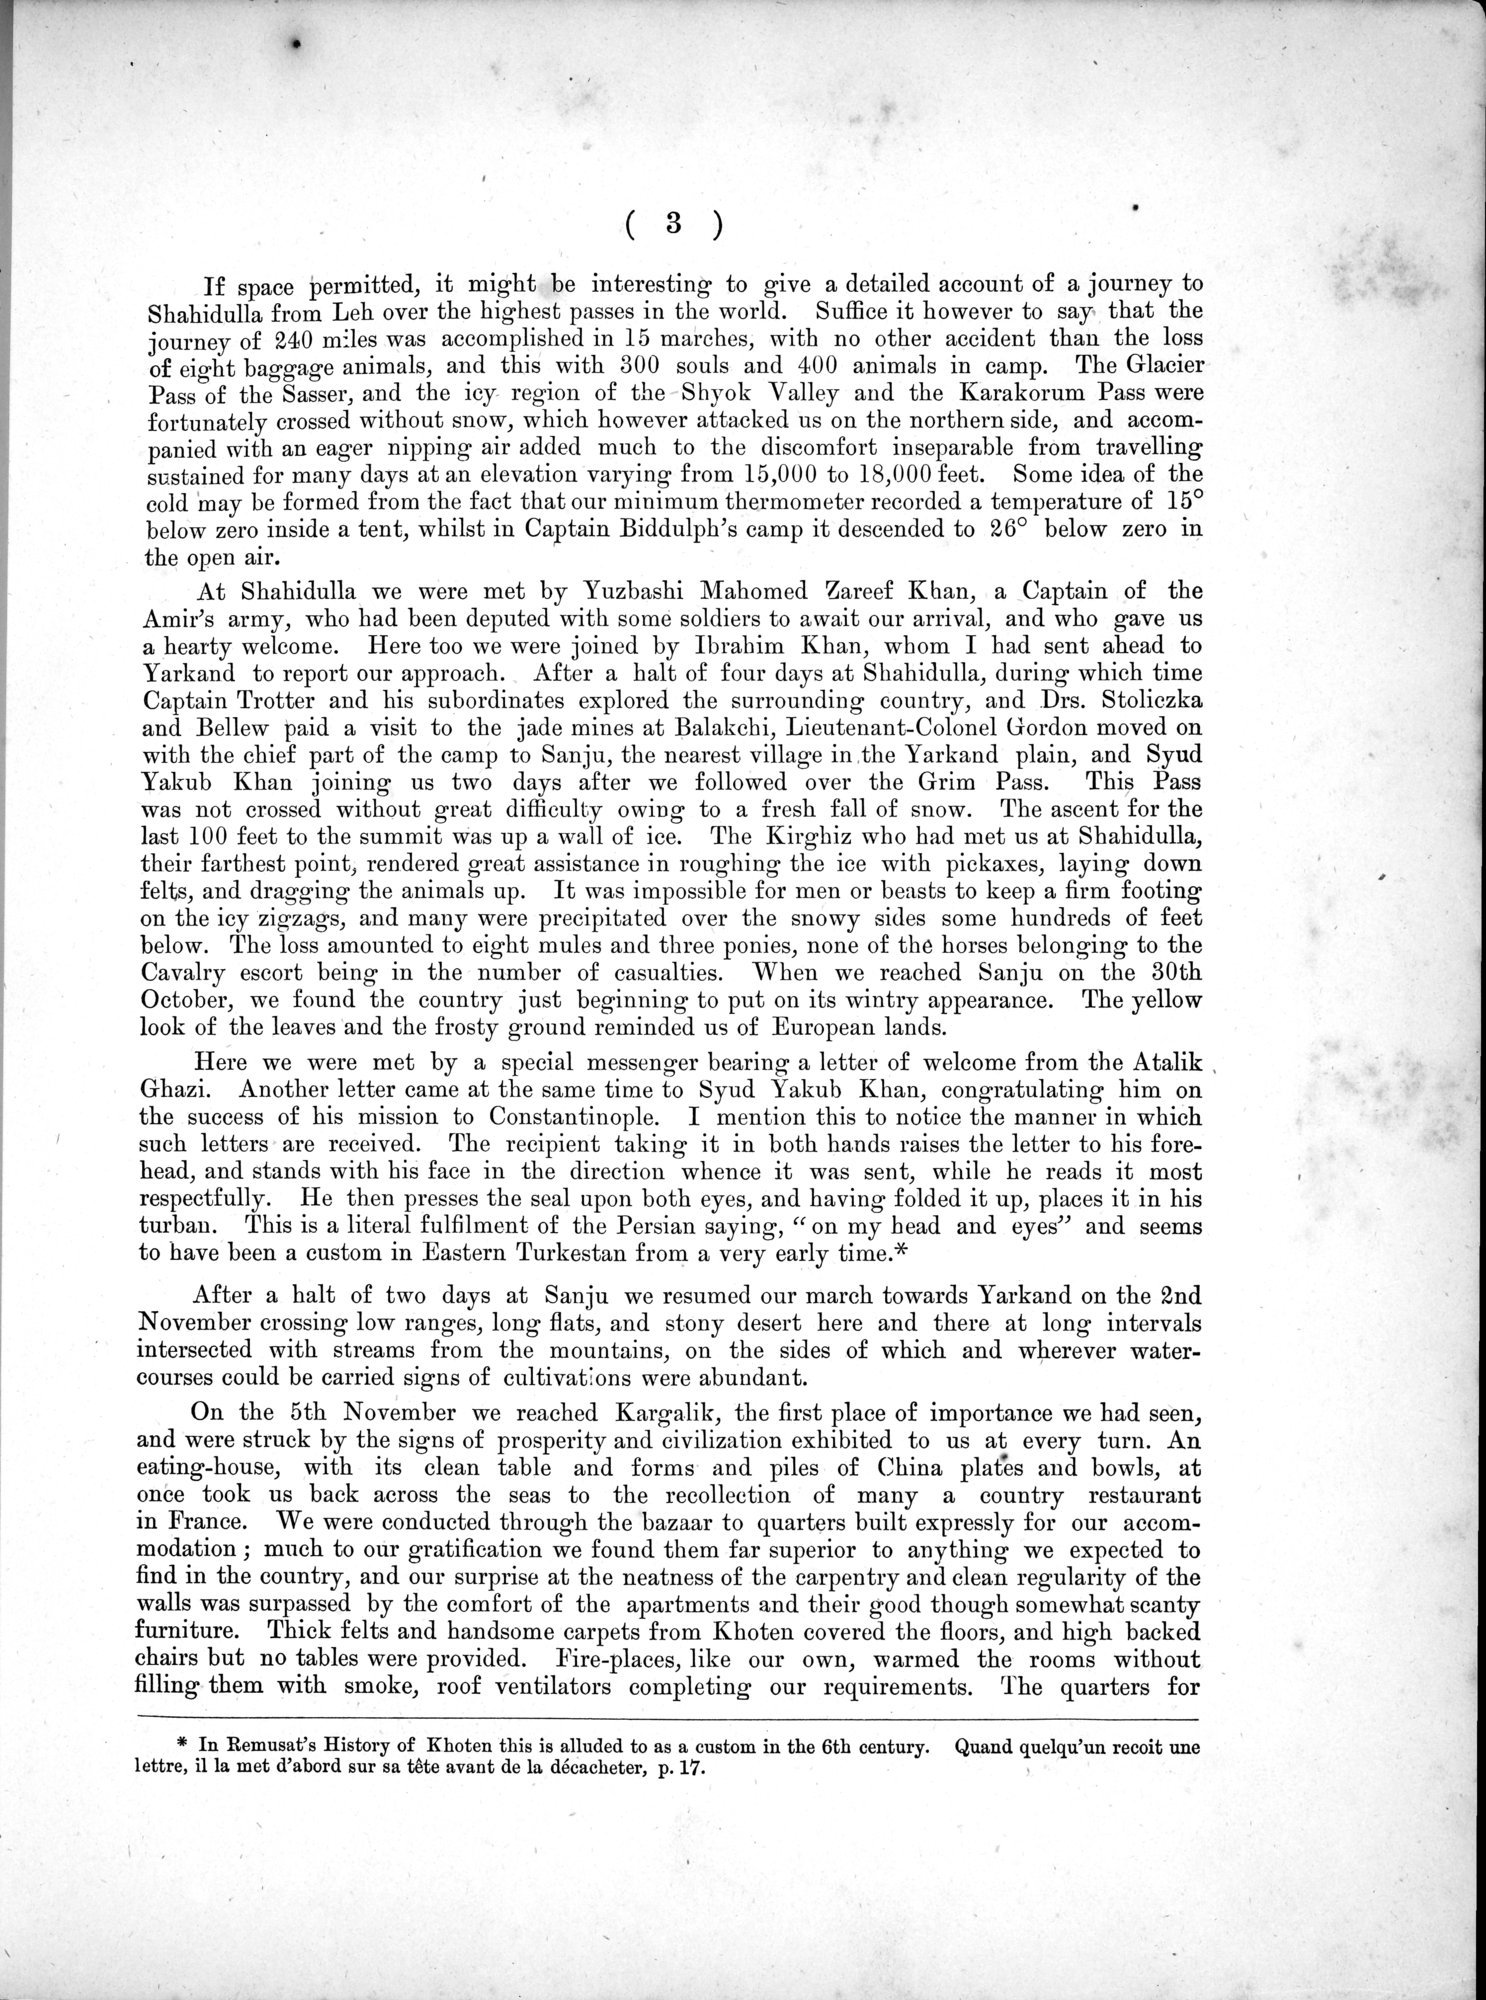 Report of a Mission to Yarkund in 1873 : vol.1 / Page 23 (Grayscale High Resolution Image)